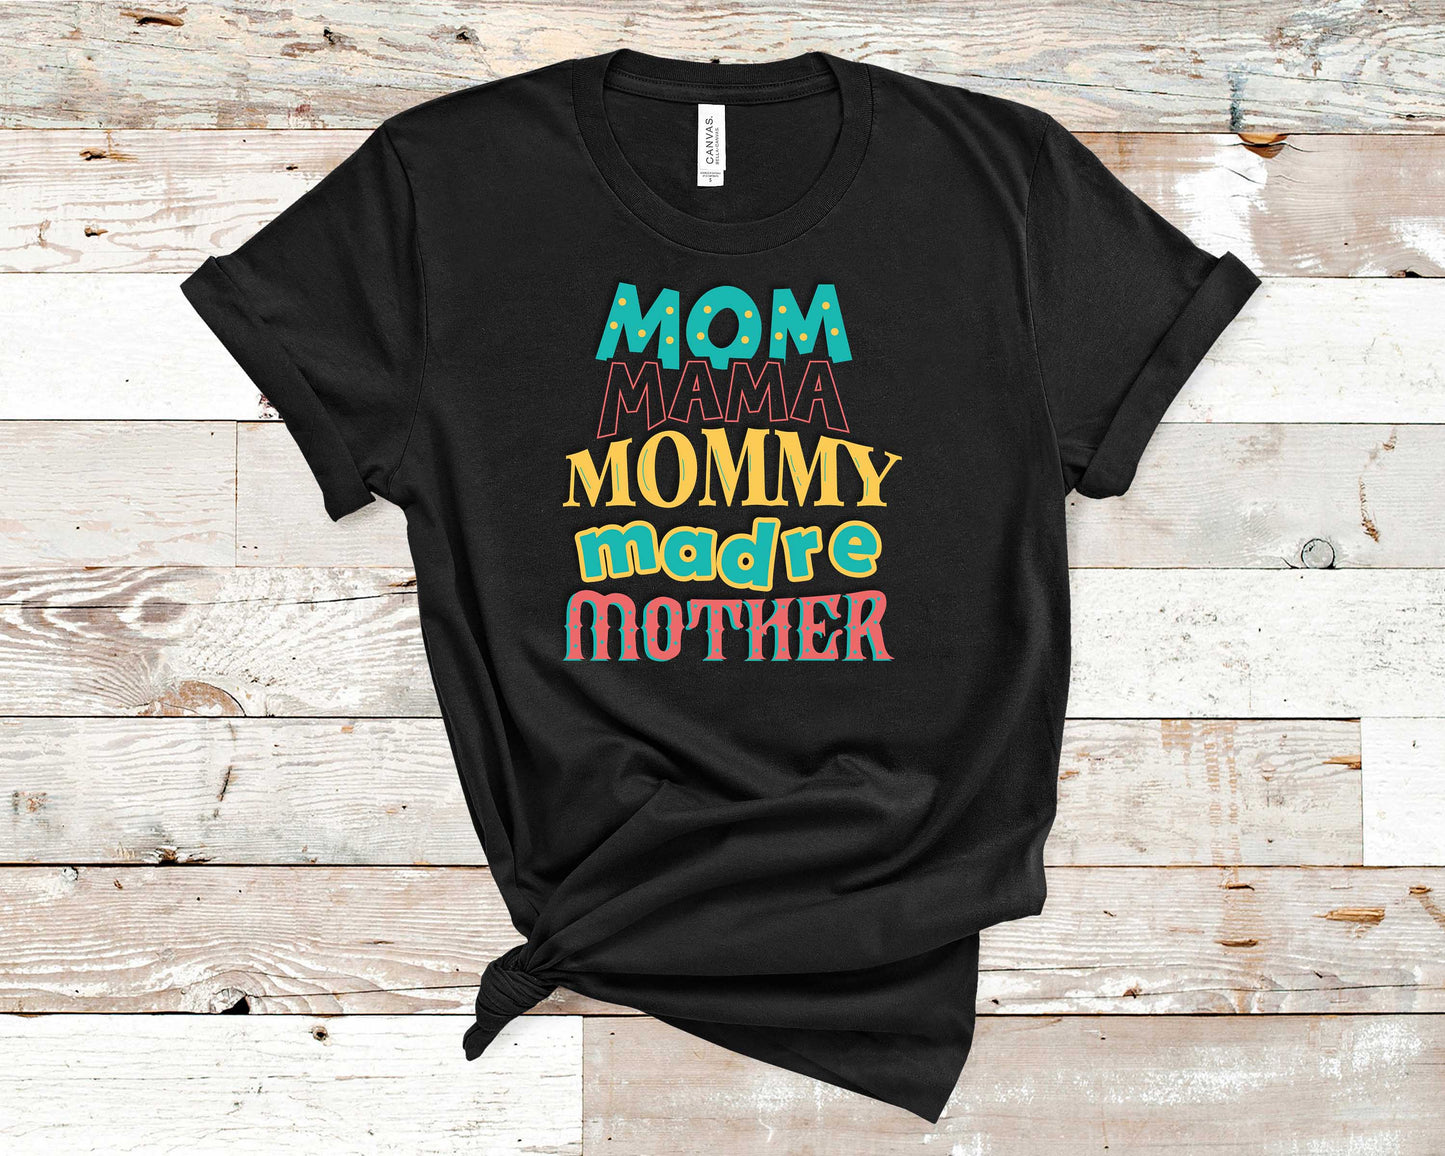 Mom Mama Mommy Madre Mother - Mother's Day